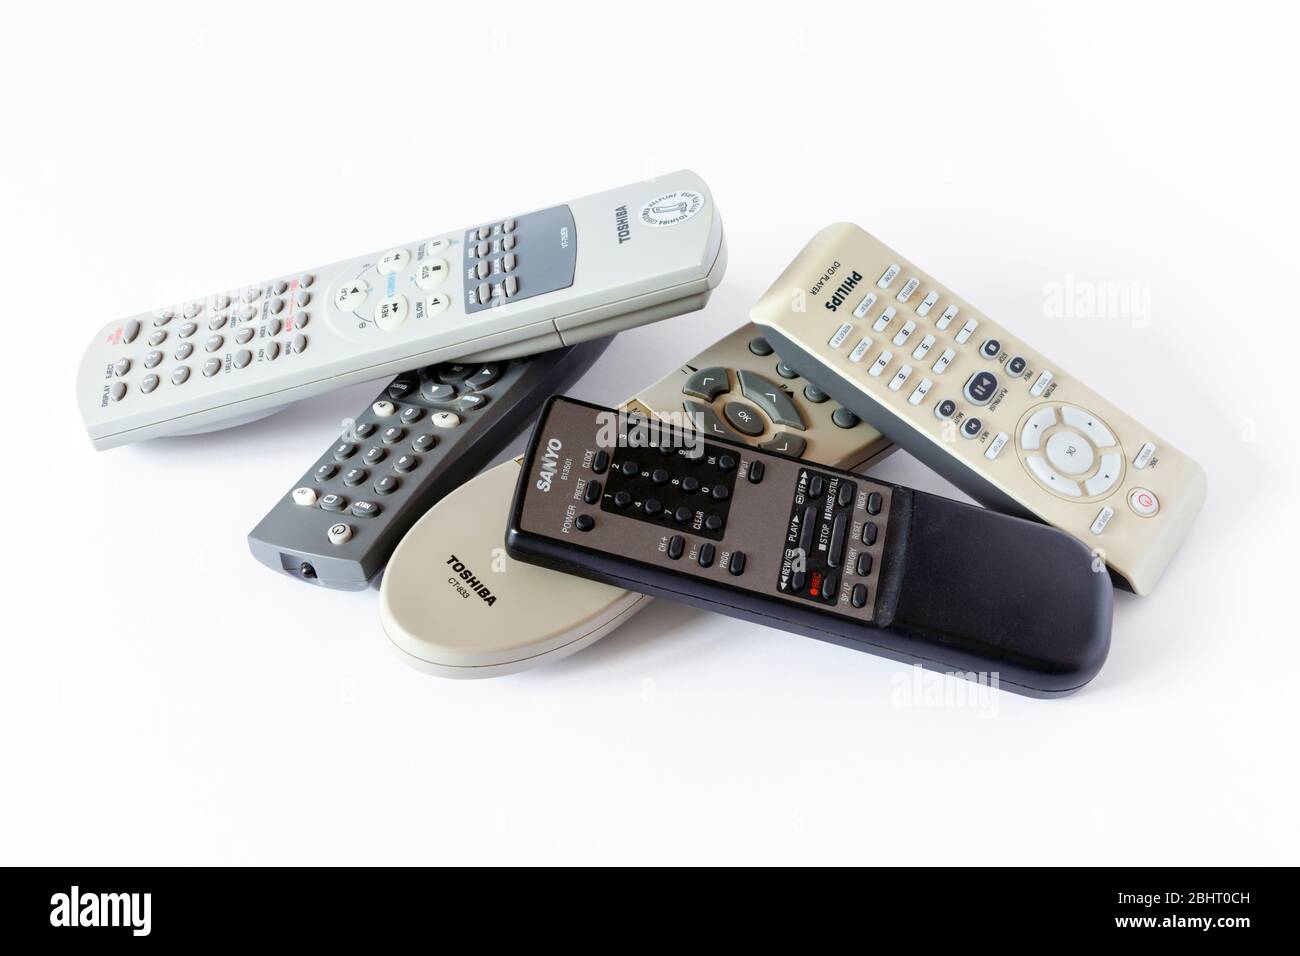 An assortment of old TV and video remote controls piled up on a white background Stock Photo